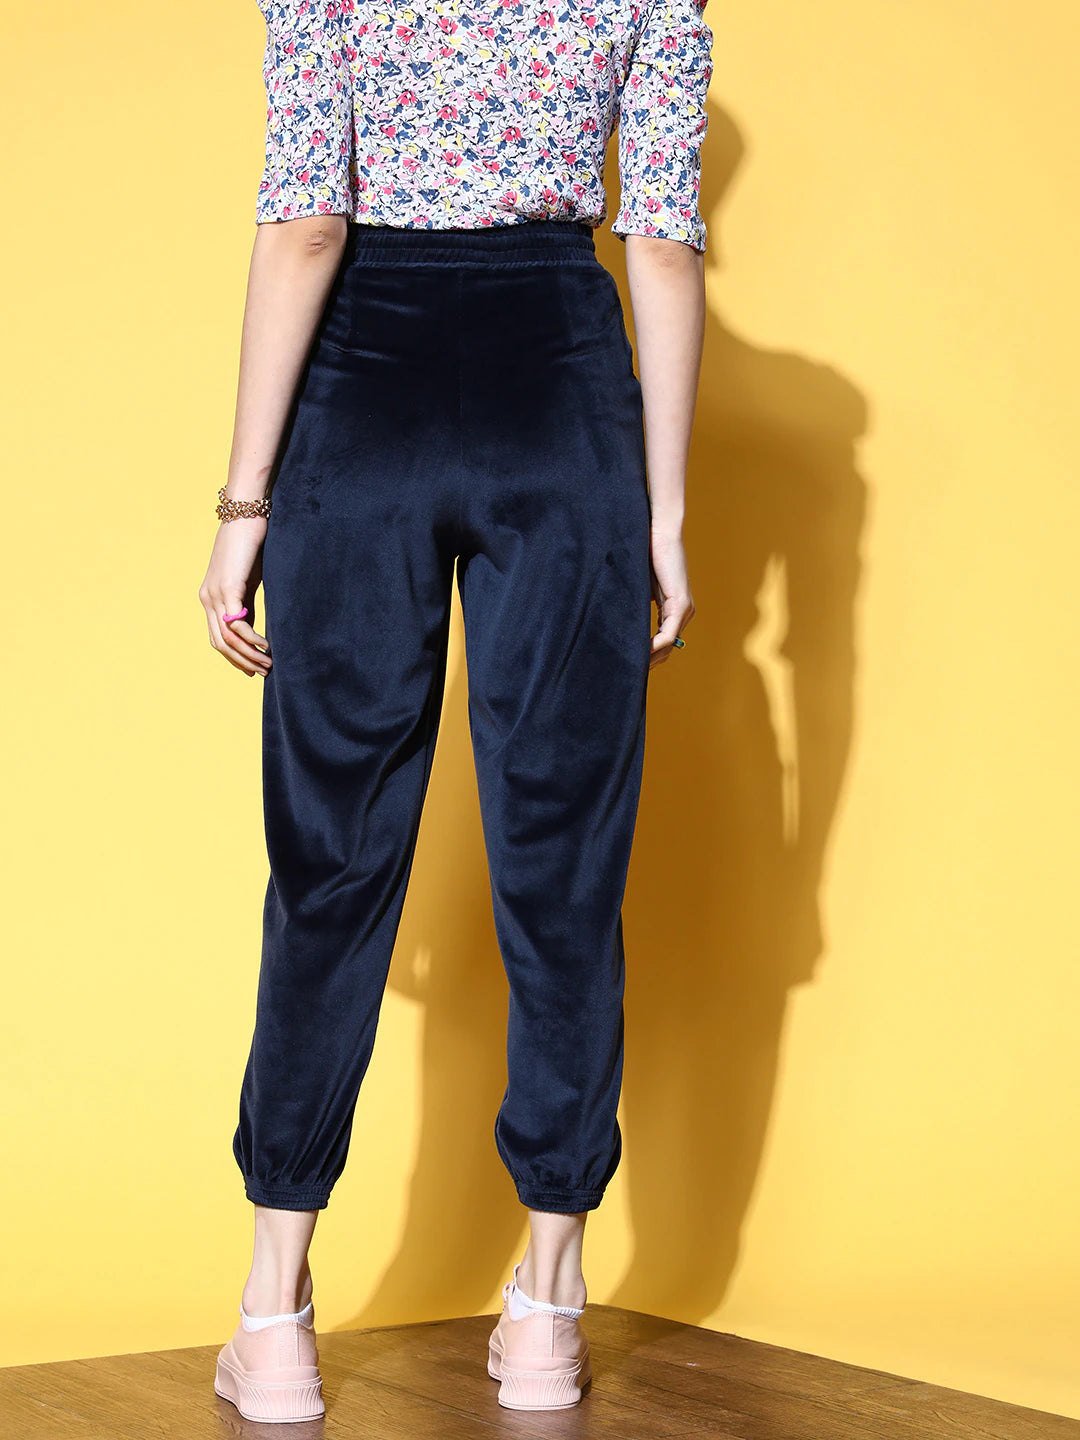 Indya Pants  Buy Indya Royal Blue Velvet Fitted Pants Online  Nykaa  Fashion